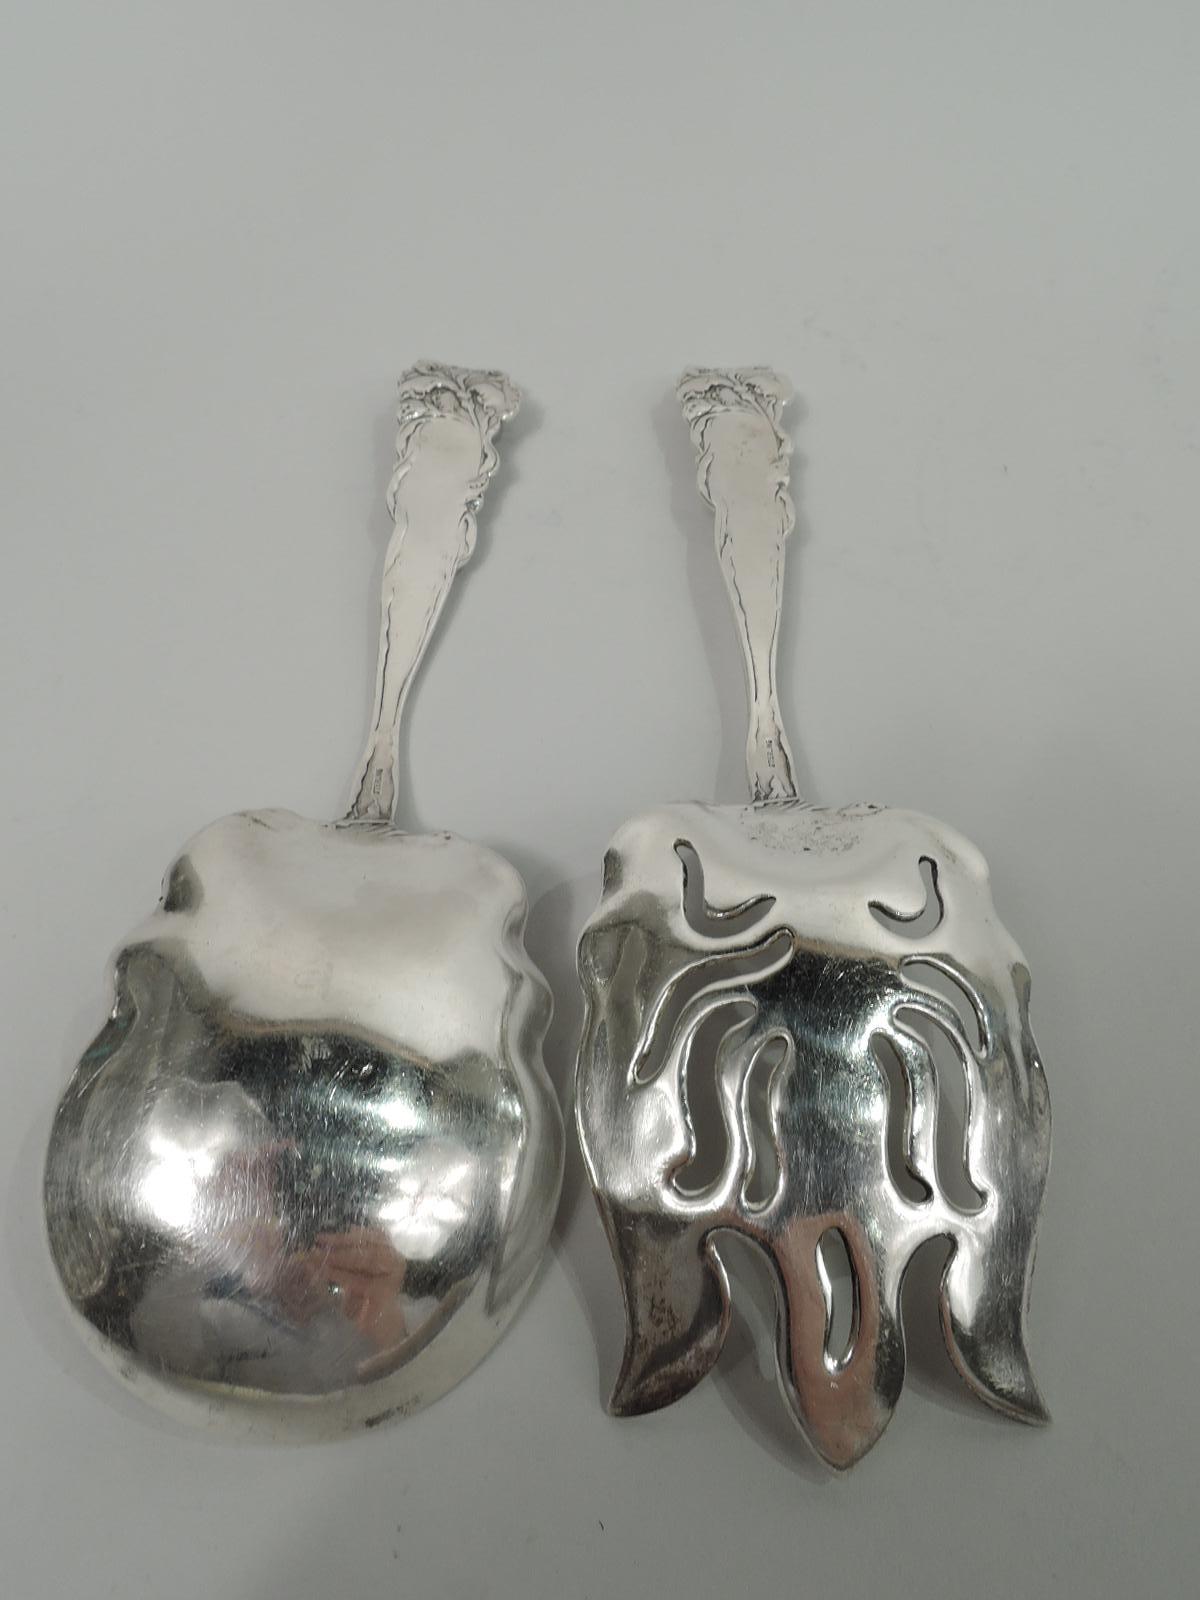 Pair of turn-of-the-century American Art Nouveau serving pair. Shaped bowl. Shank same with 3 tines and ornamental piercing. Floral mount and handle with drapery-clad bacchante holding aloft tendrils. A risqué design for the salad course. Marked